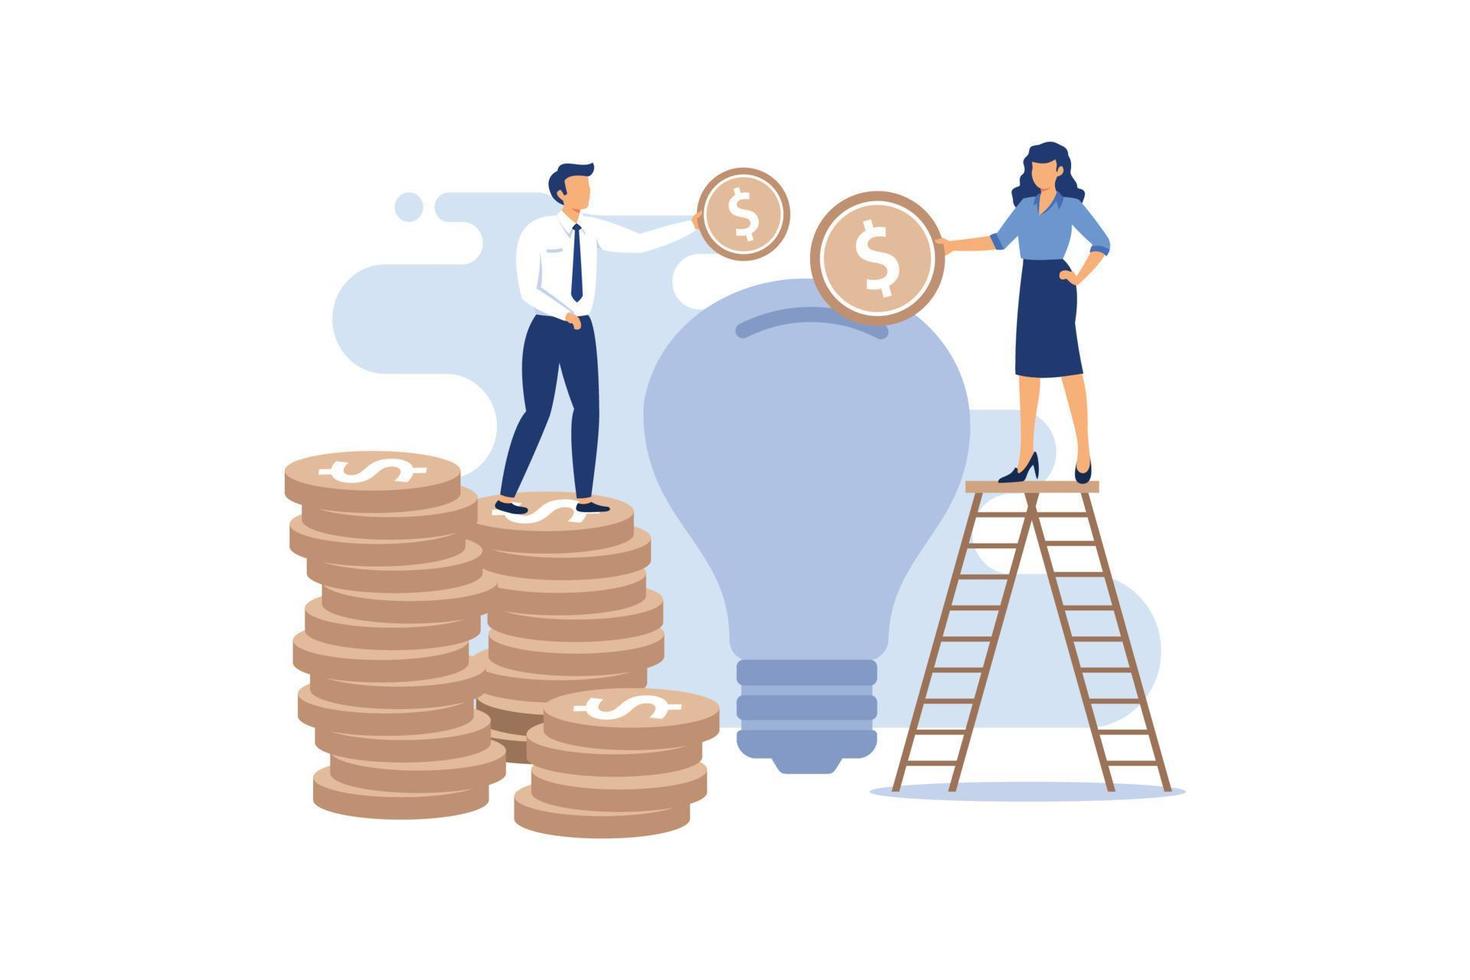 Venture capital. A man standing on a stack of coins, a woman standing on a ladder throwing coins in a light bulb, on the background of dollar icons flat modern design illustration vector